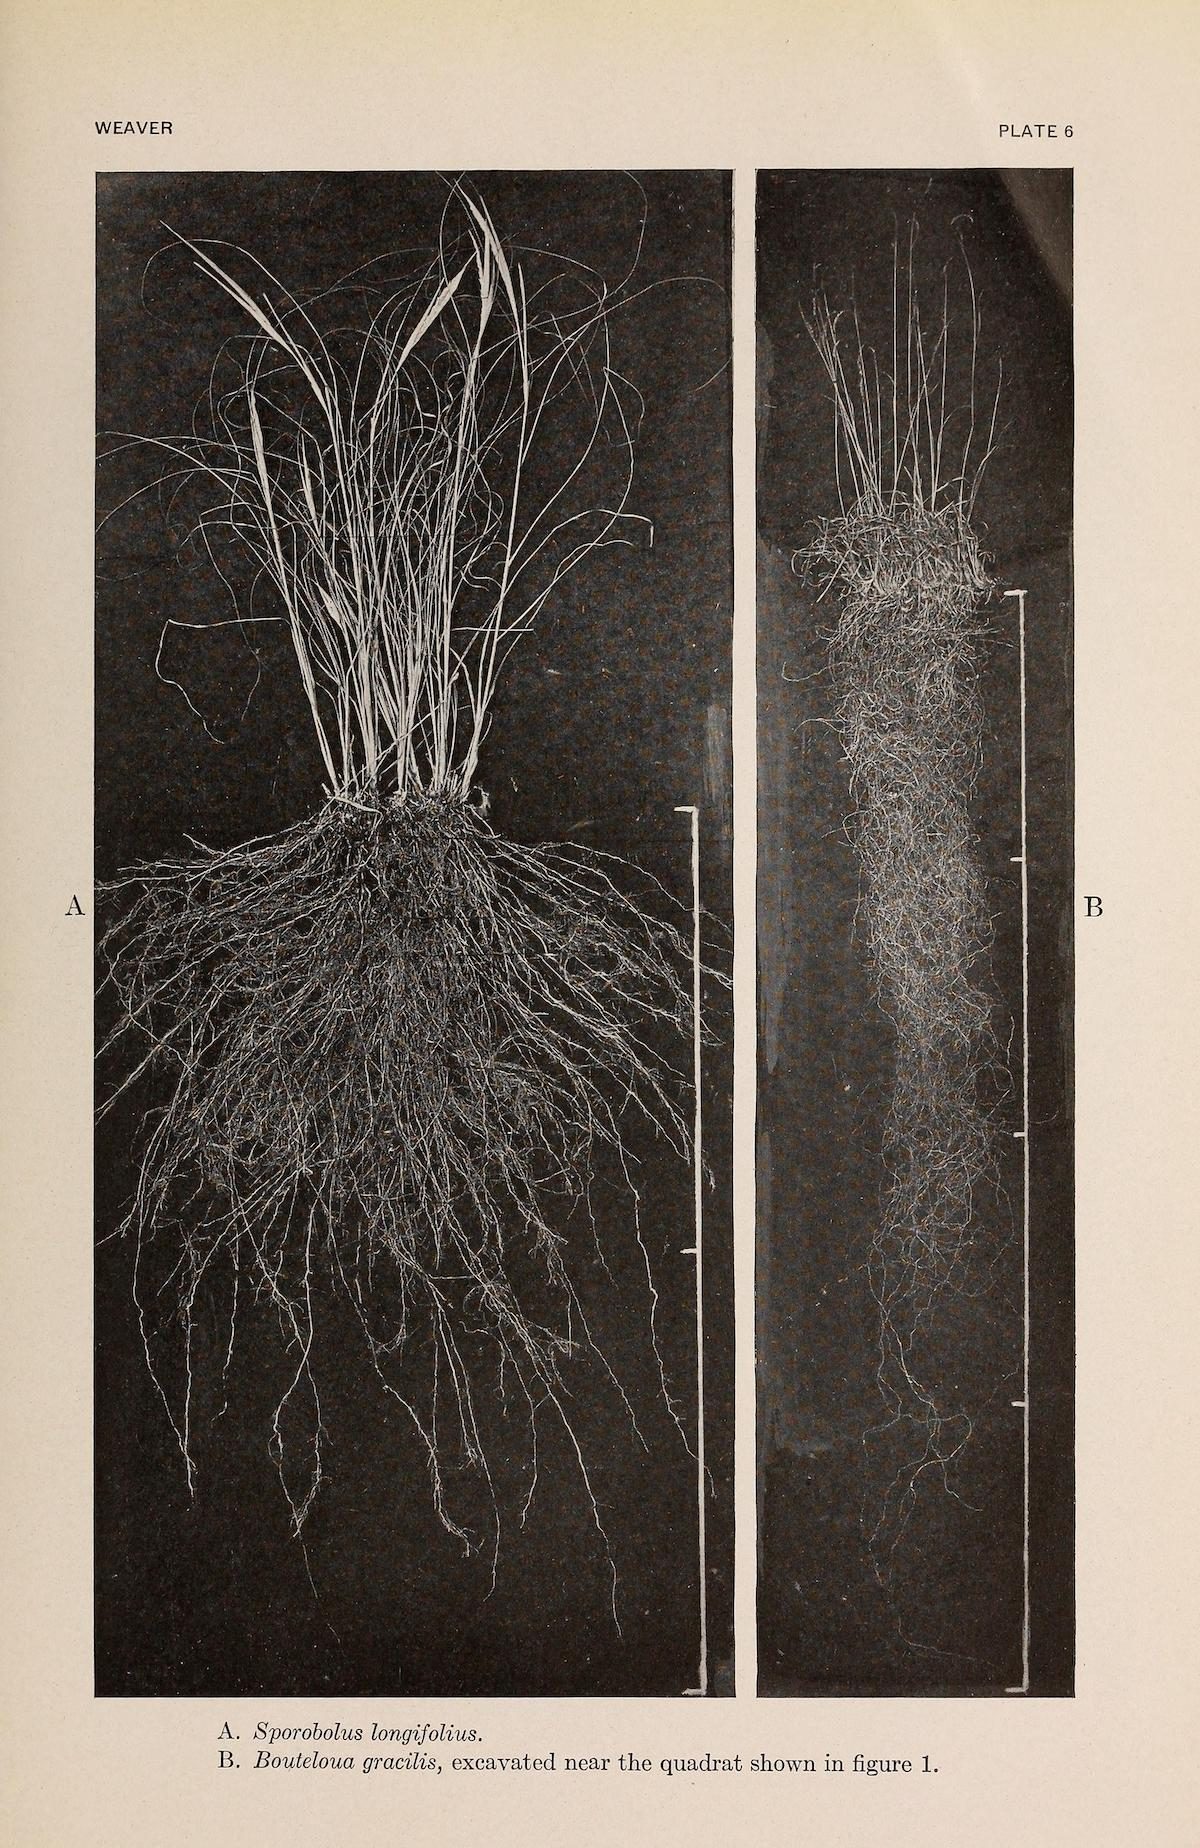 The Ecological Relations of Roots by John Ernest Weaver